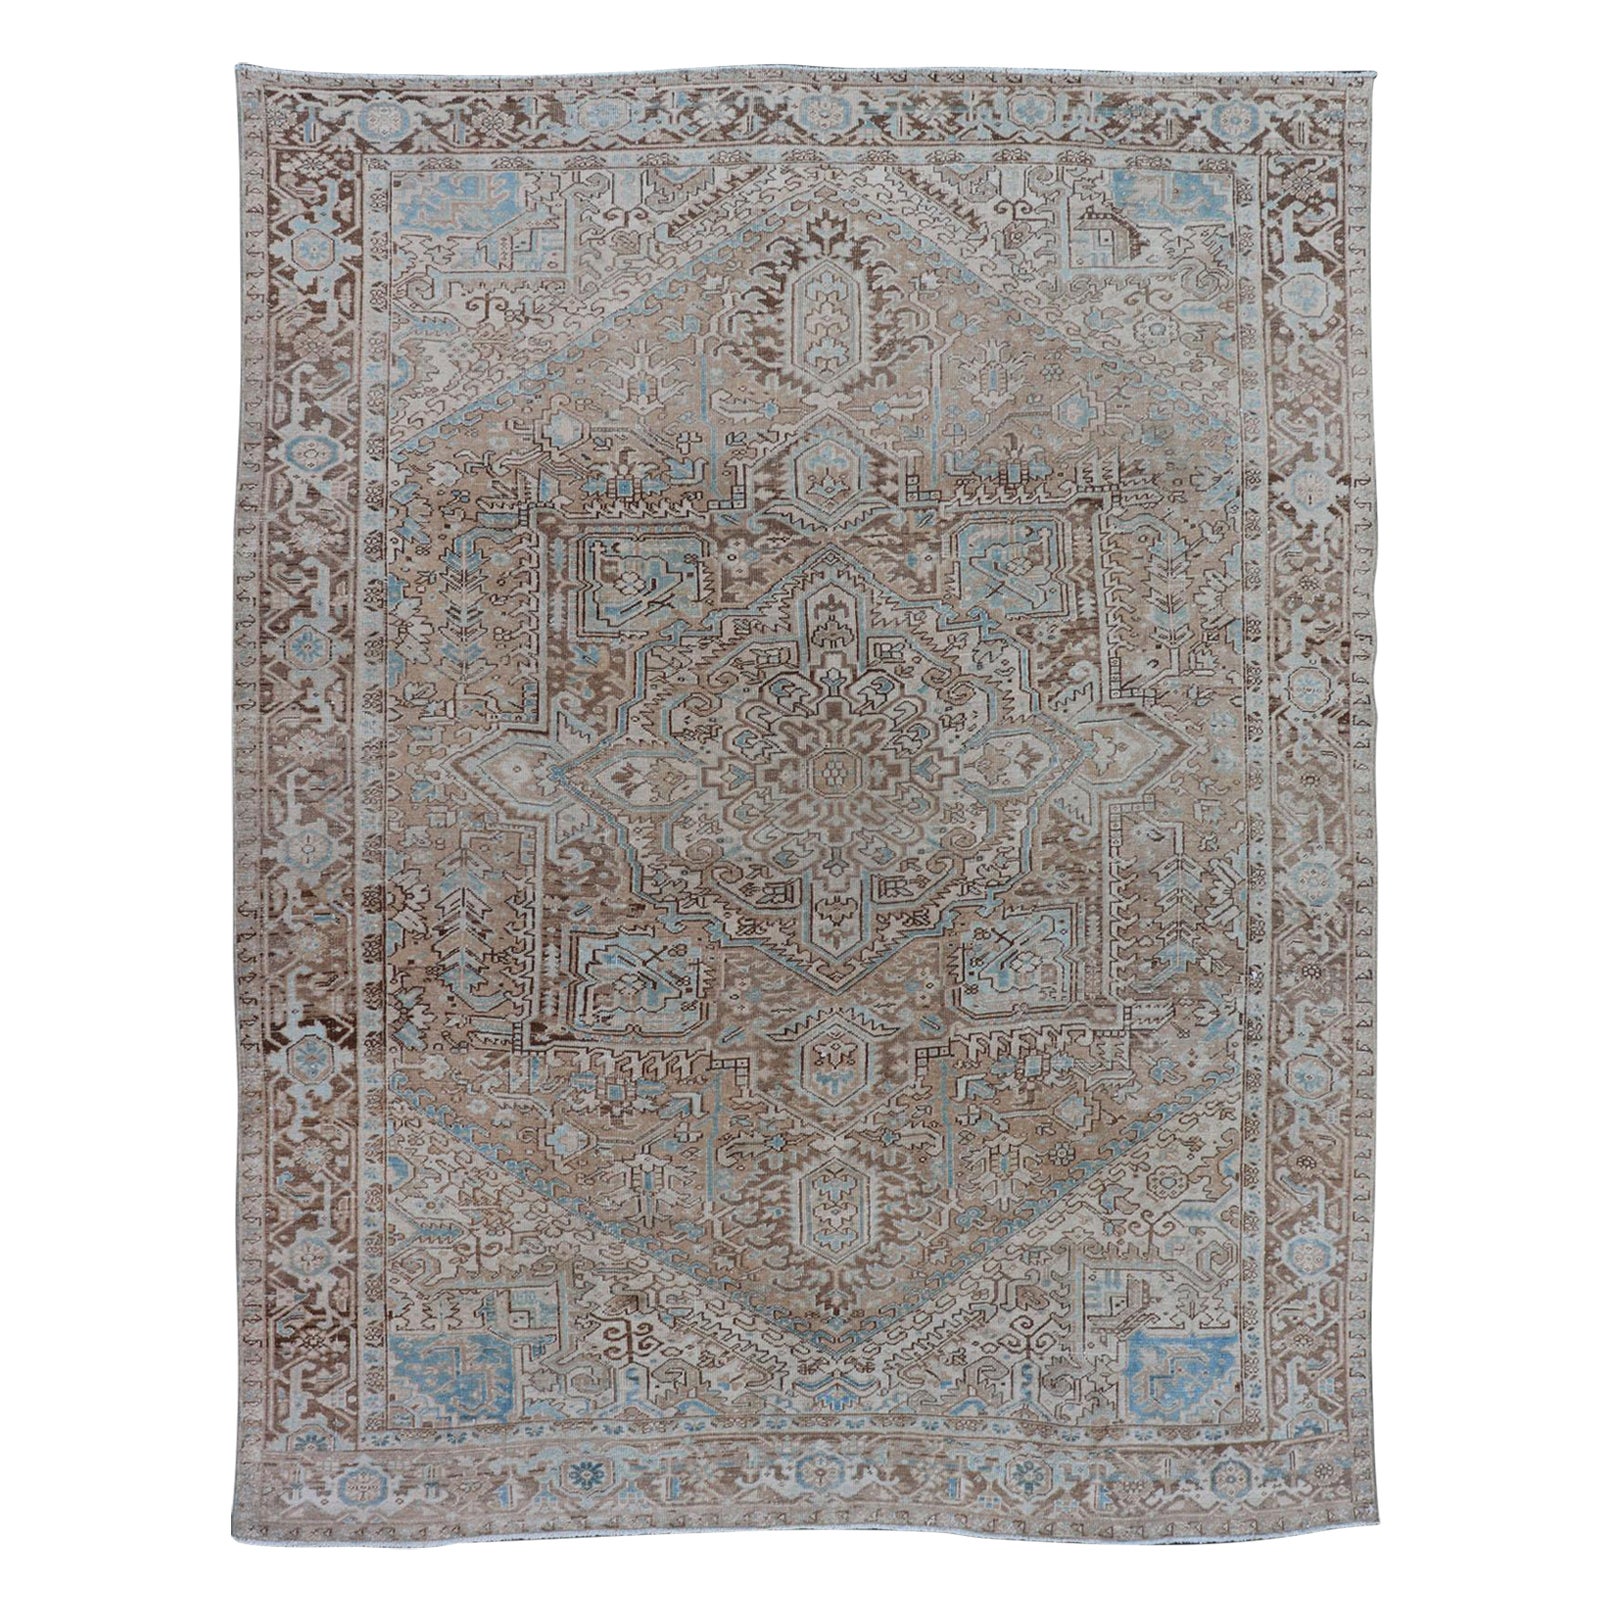 Antique Persian Heriz Rug with Geometric Design in Taupe, Tan, Brown and Lt Blue